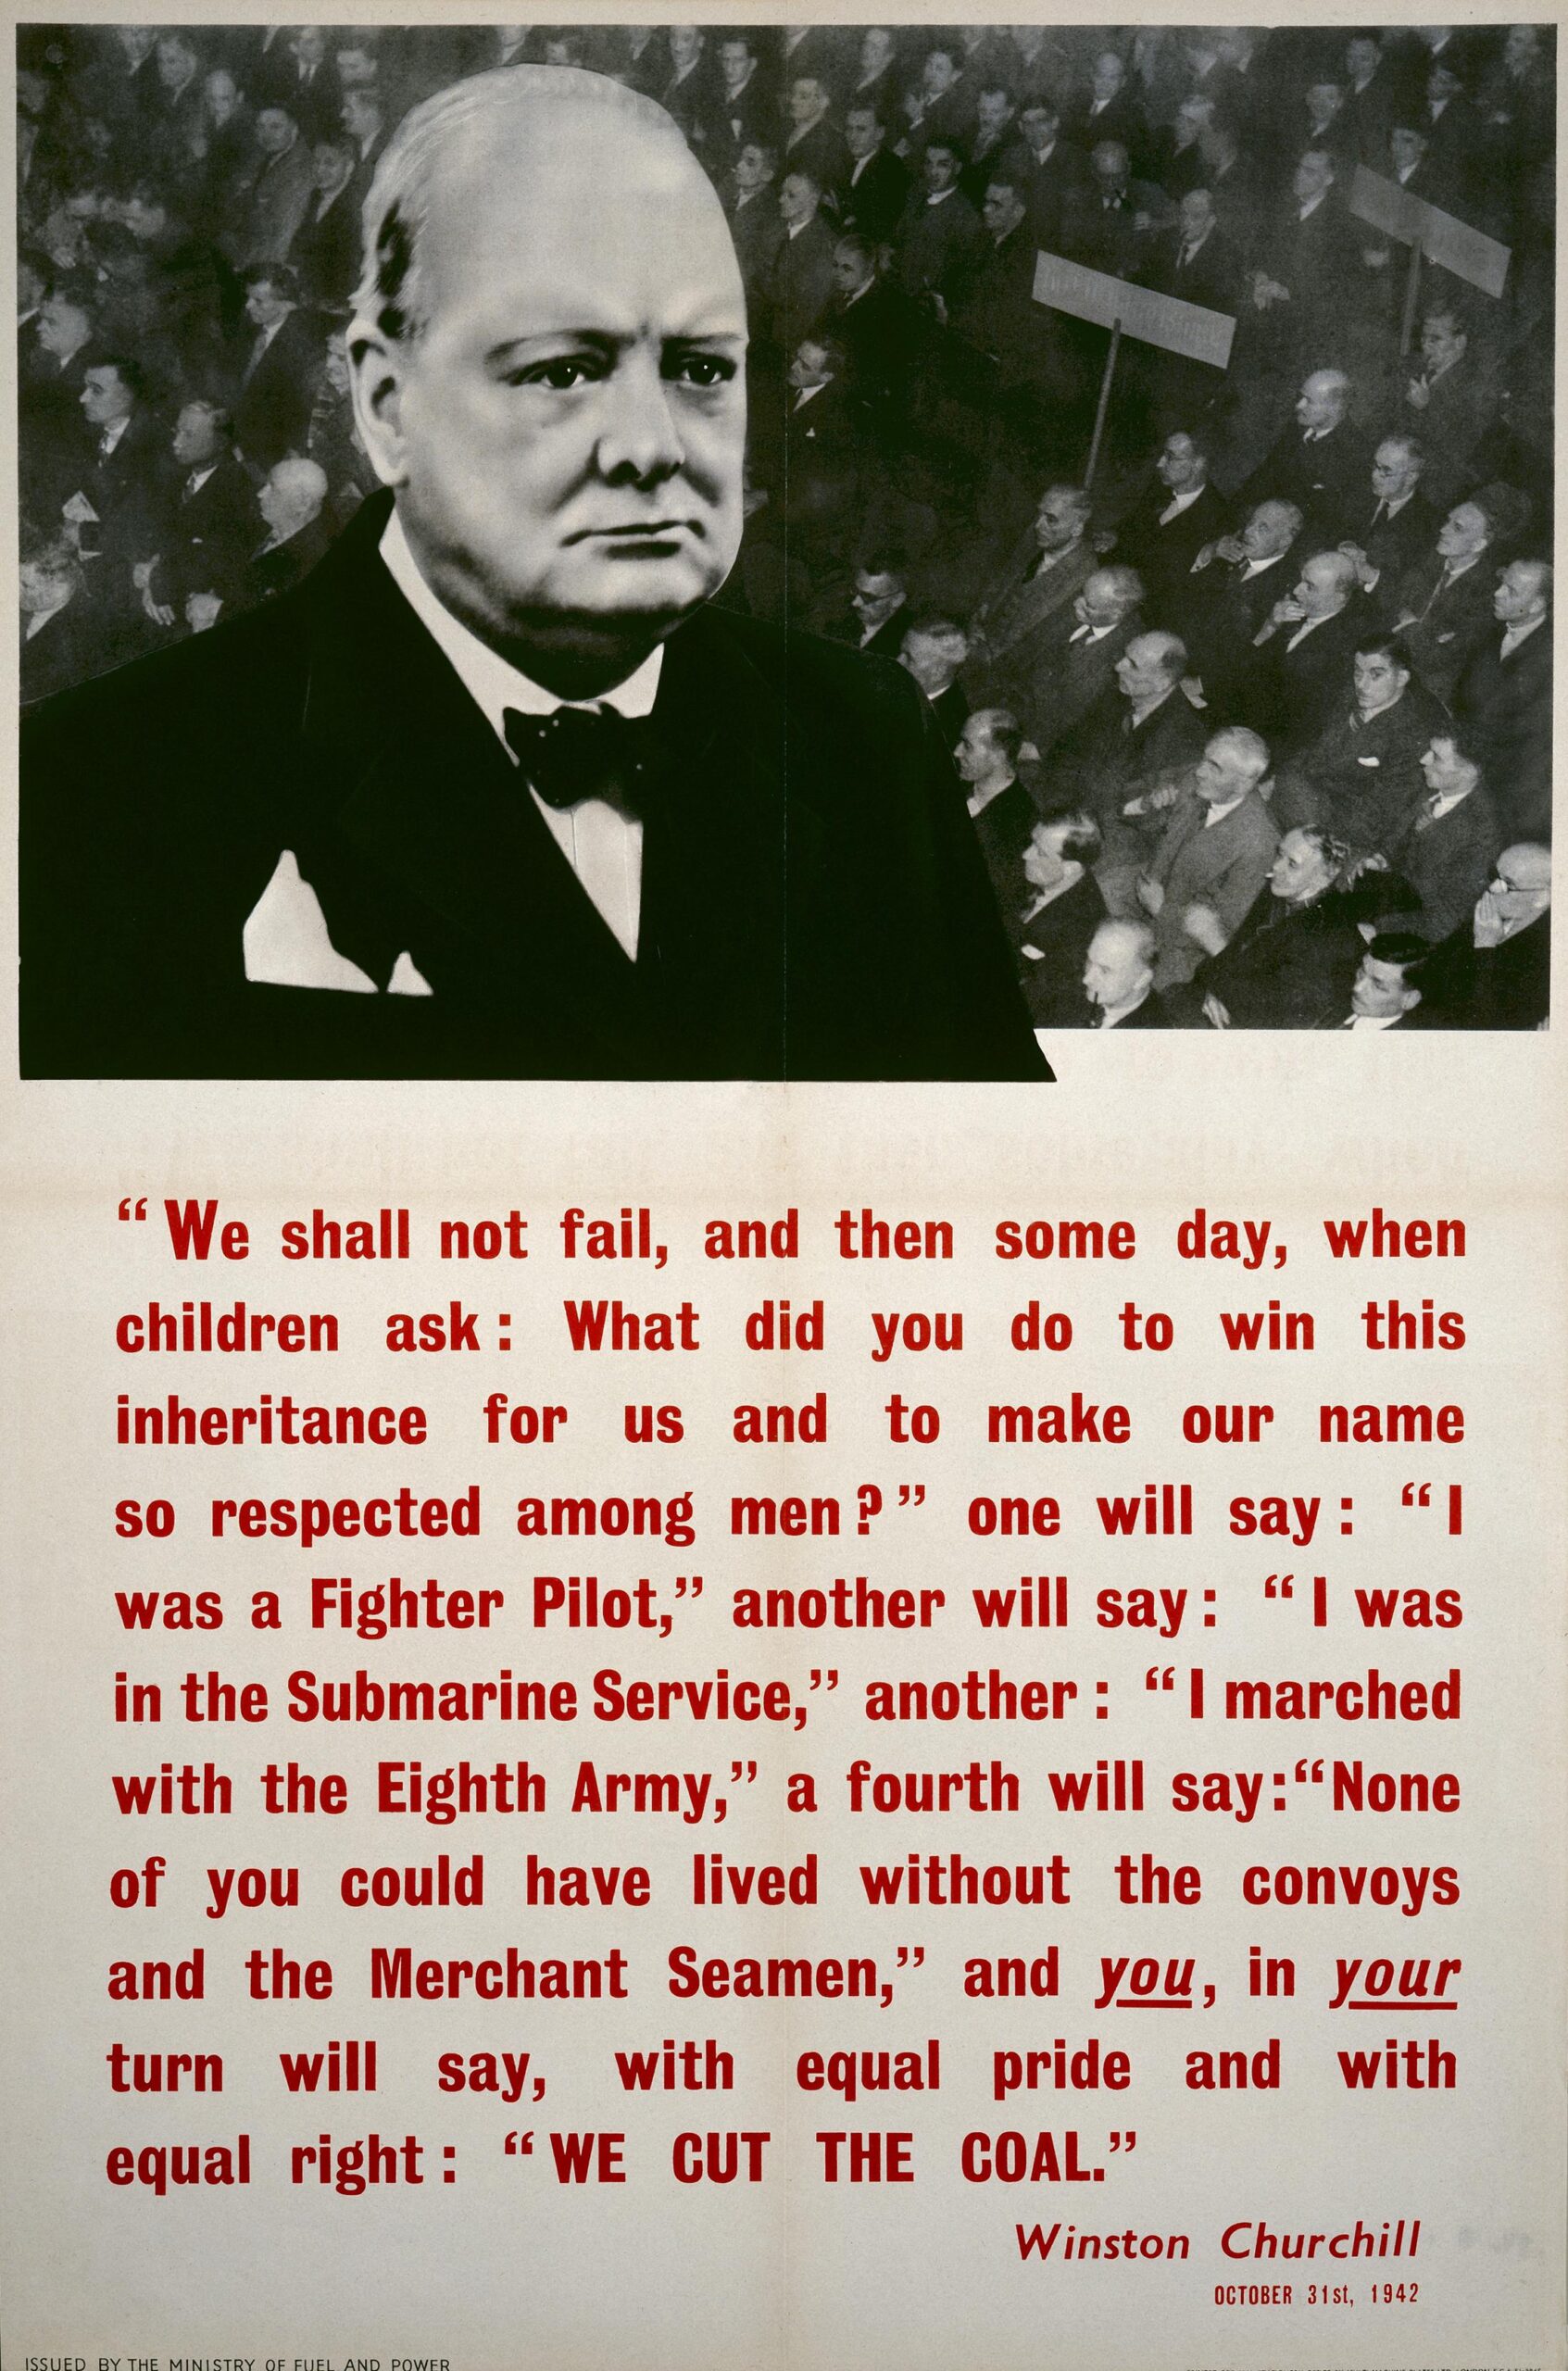 Poster with a monochrome portrait of Winston Churchill on top of a background photo of people sitting in an audience. Red text is below.